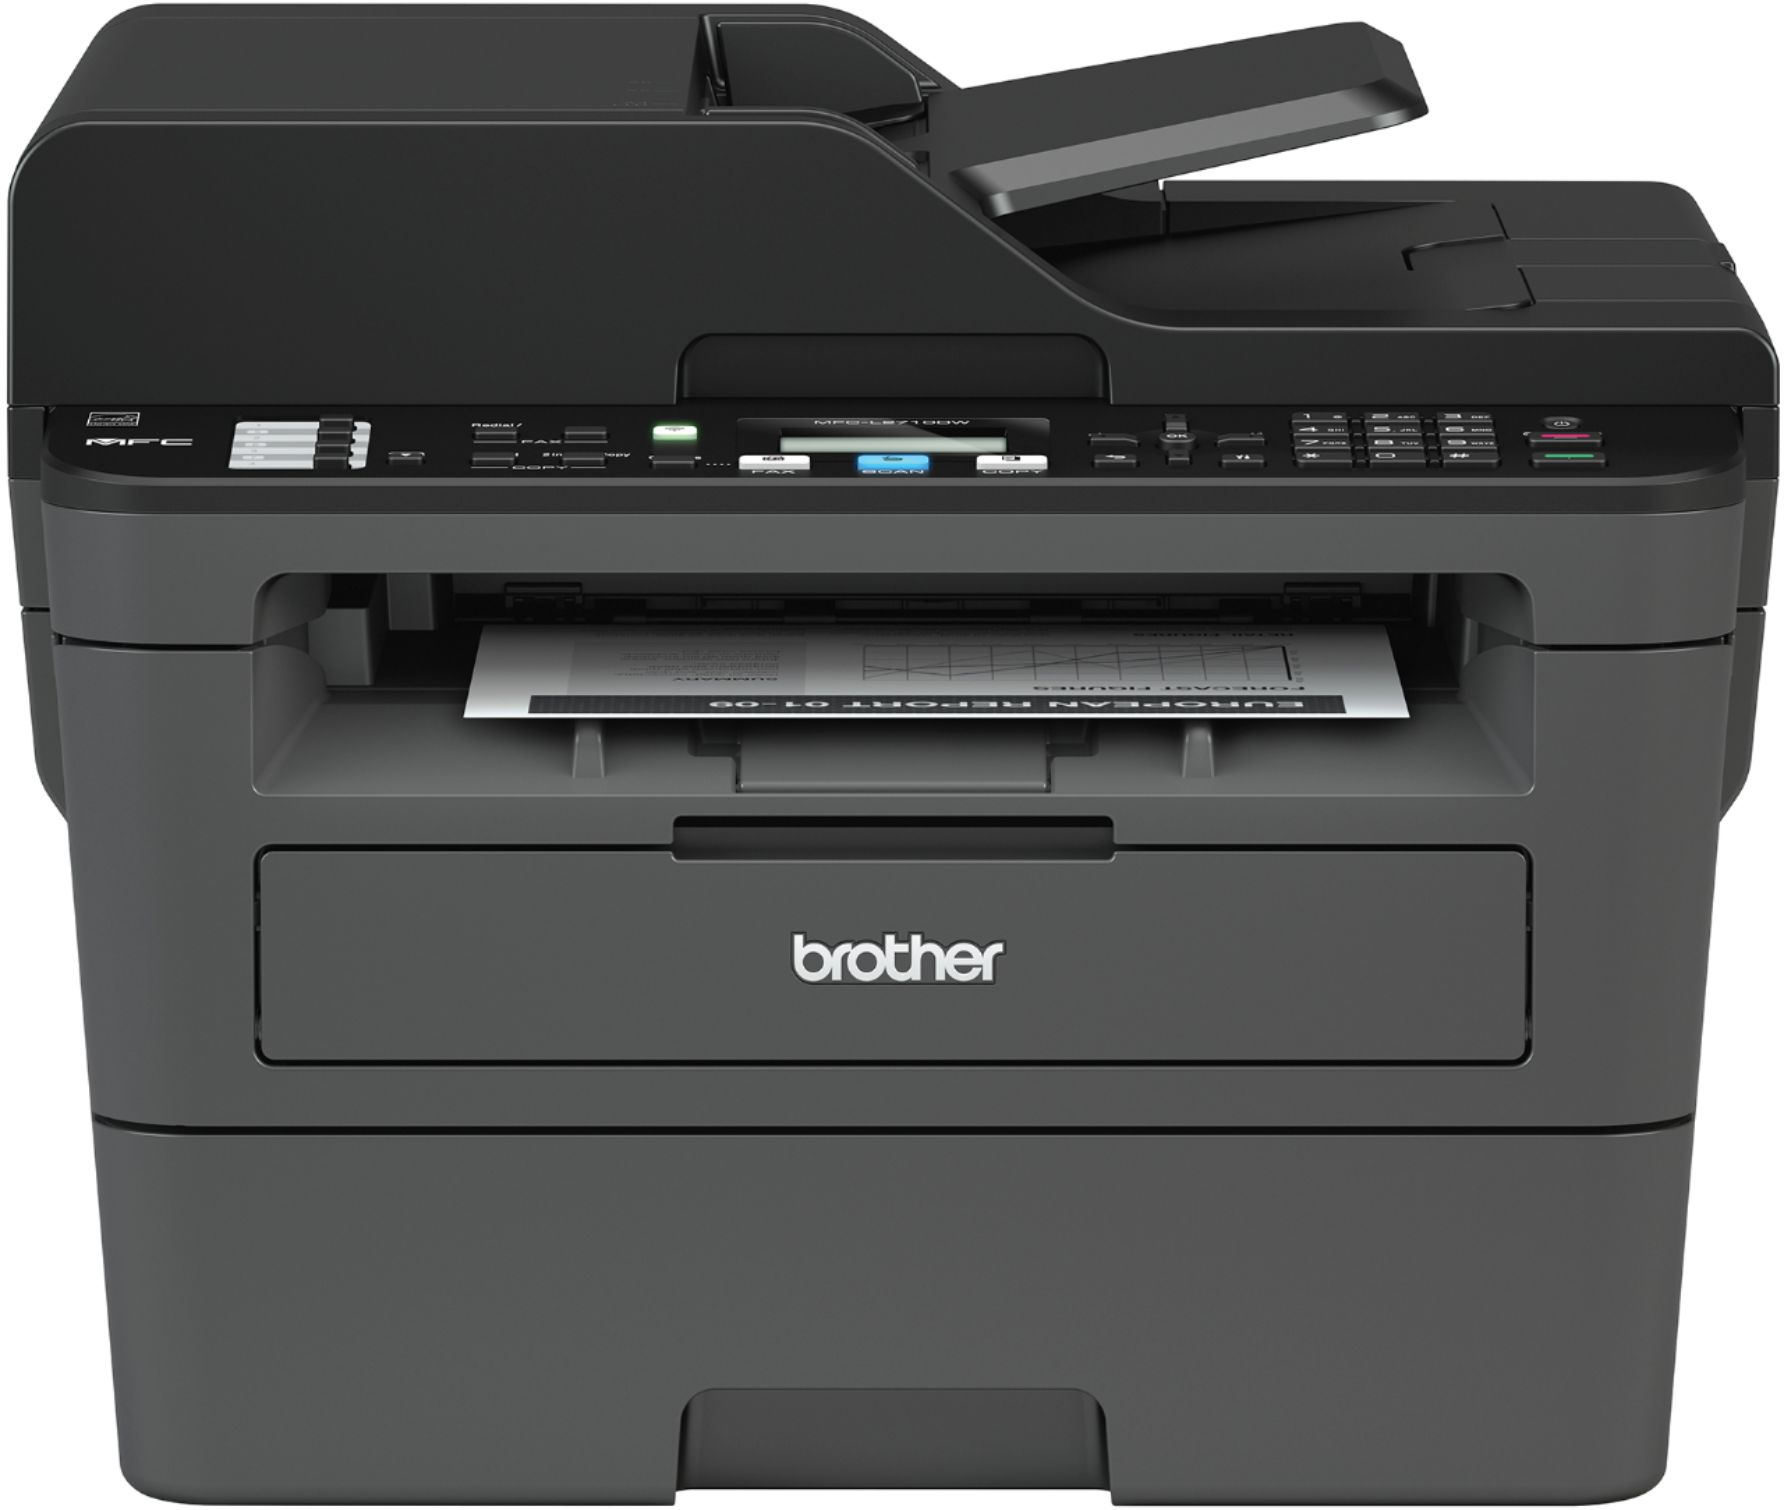 Brother MFC-L2710DW Wireless Black-and-White All-in-One Subscription Eligible Laser Printer Black MFC-L2710DW - Best Buy